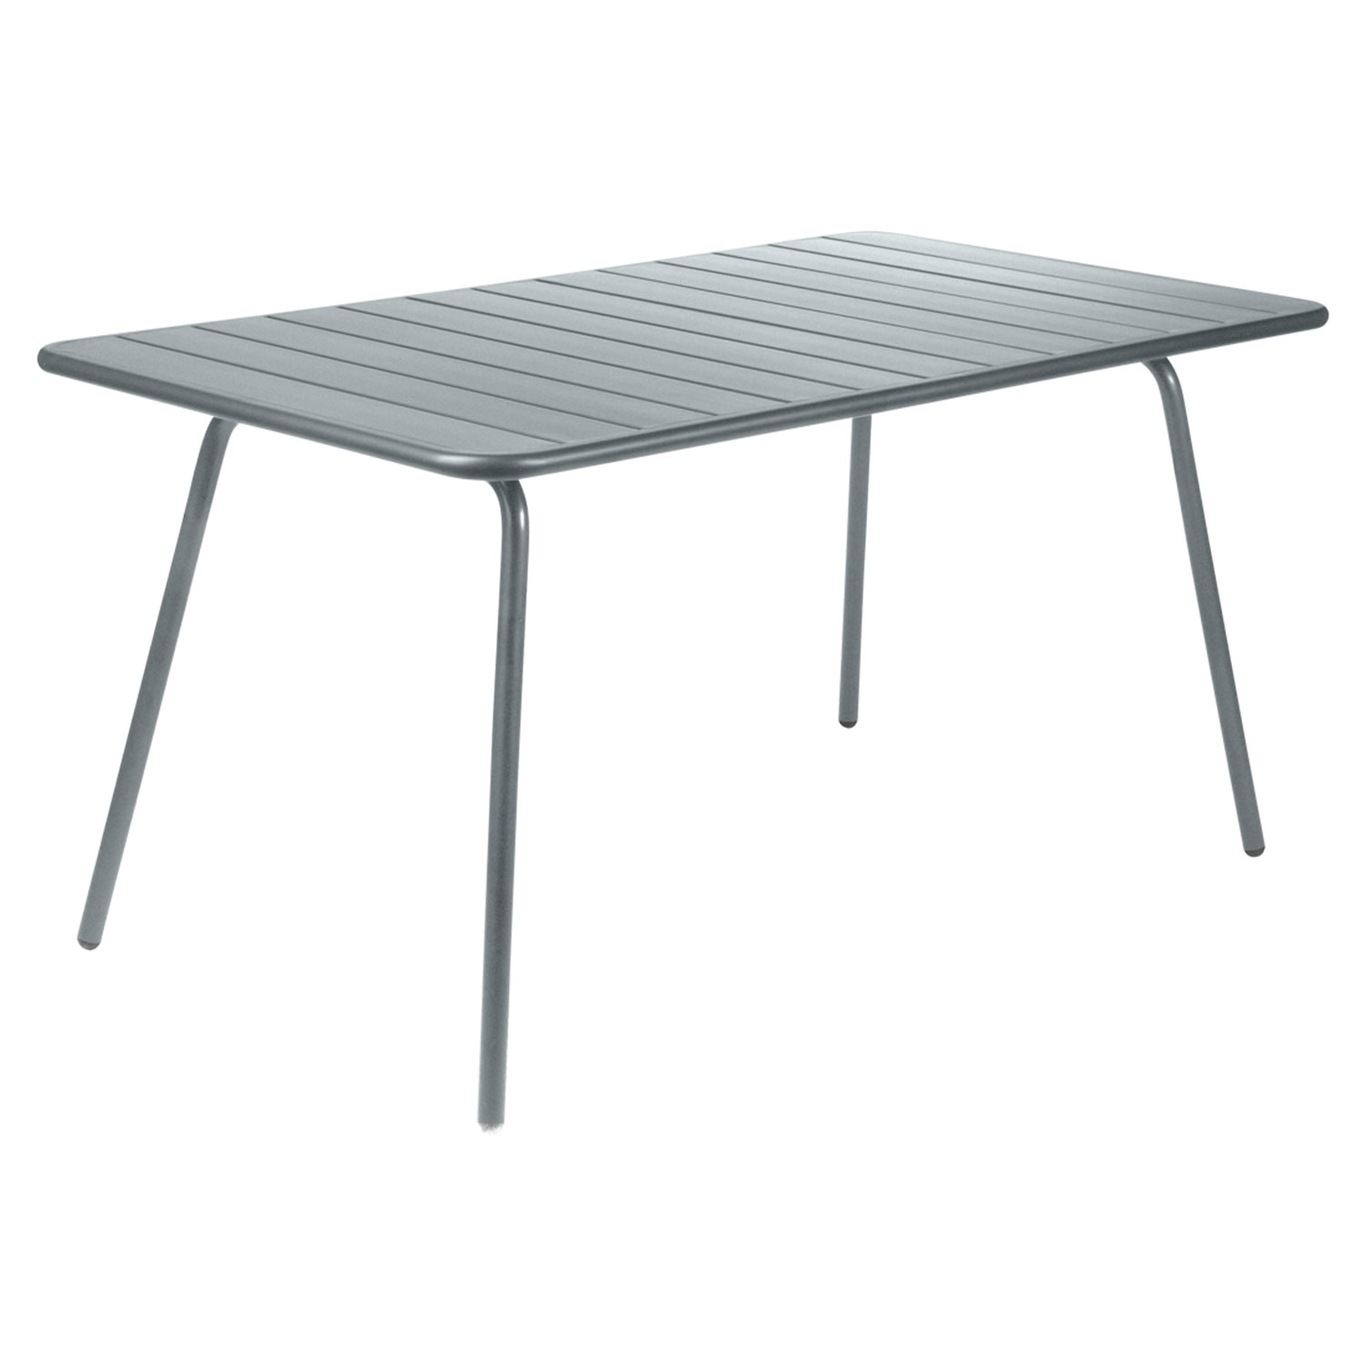 Luxembourg Table 143x80, Storm Grey